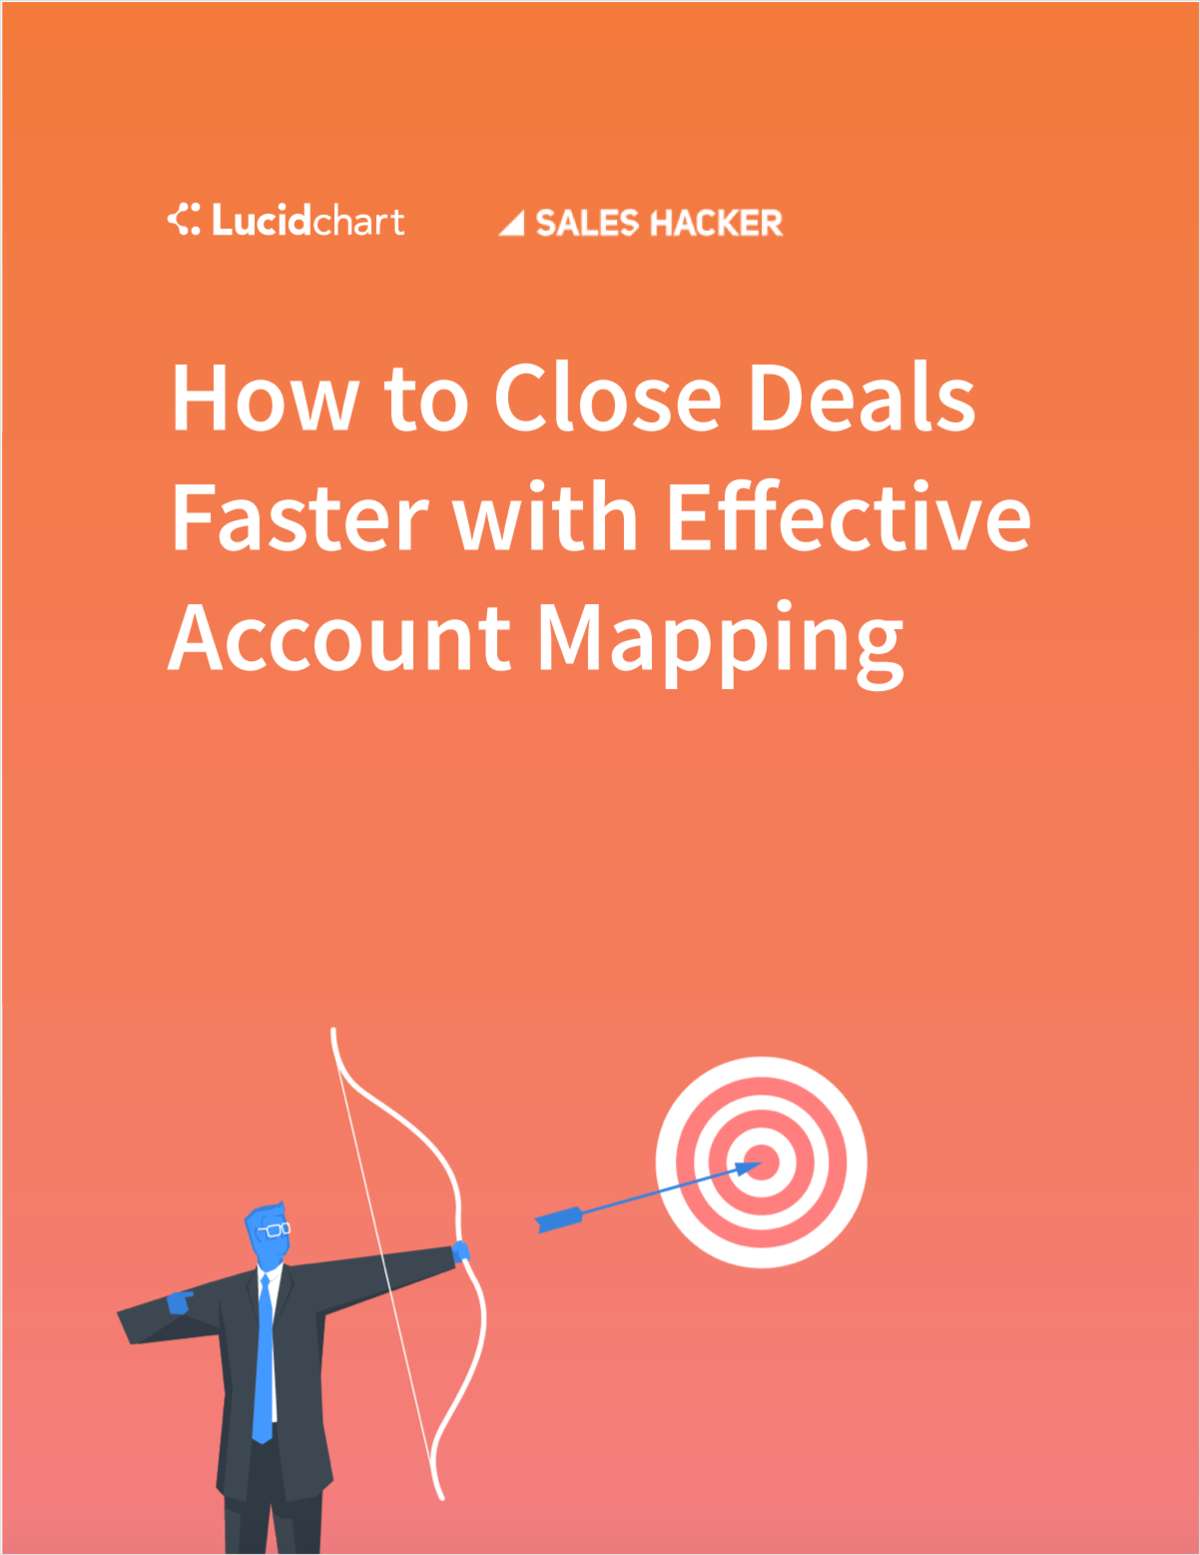 How to Close Deals Faster with Effective Account Mapping